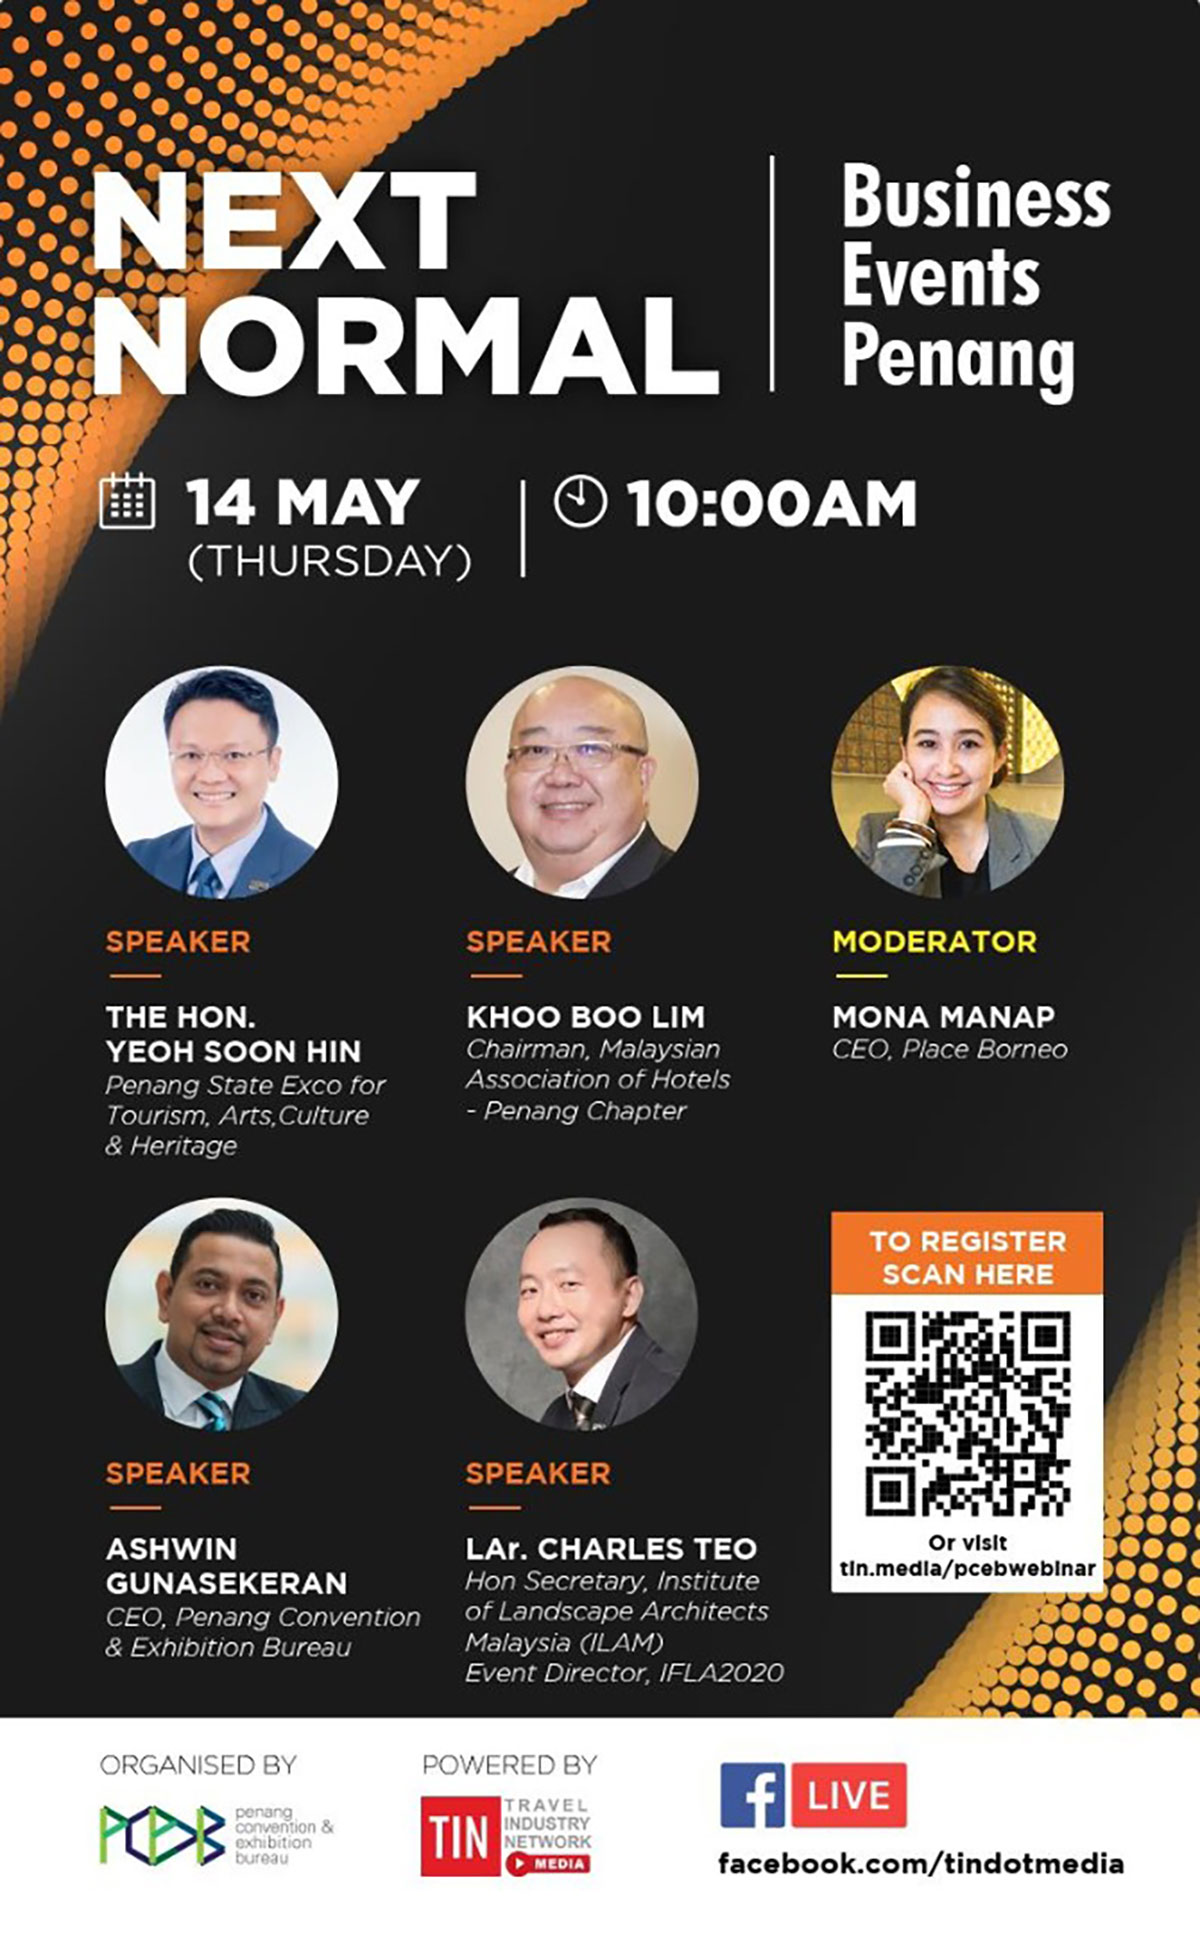 Next Normal Business Event Penang